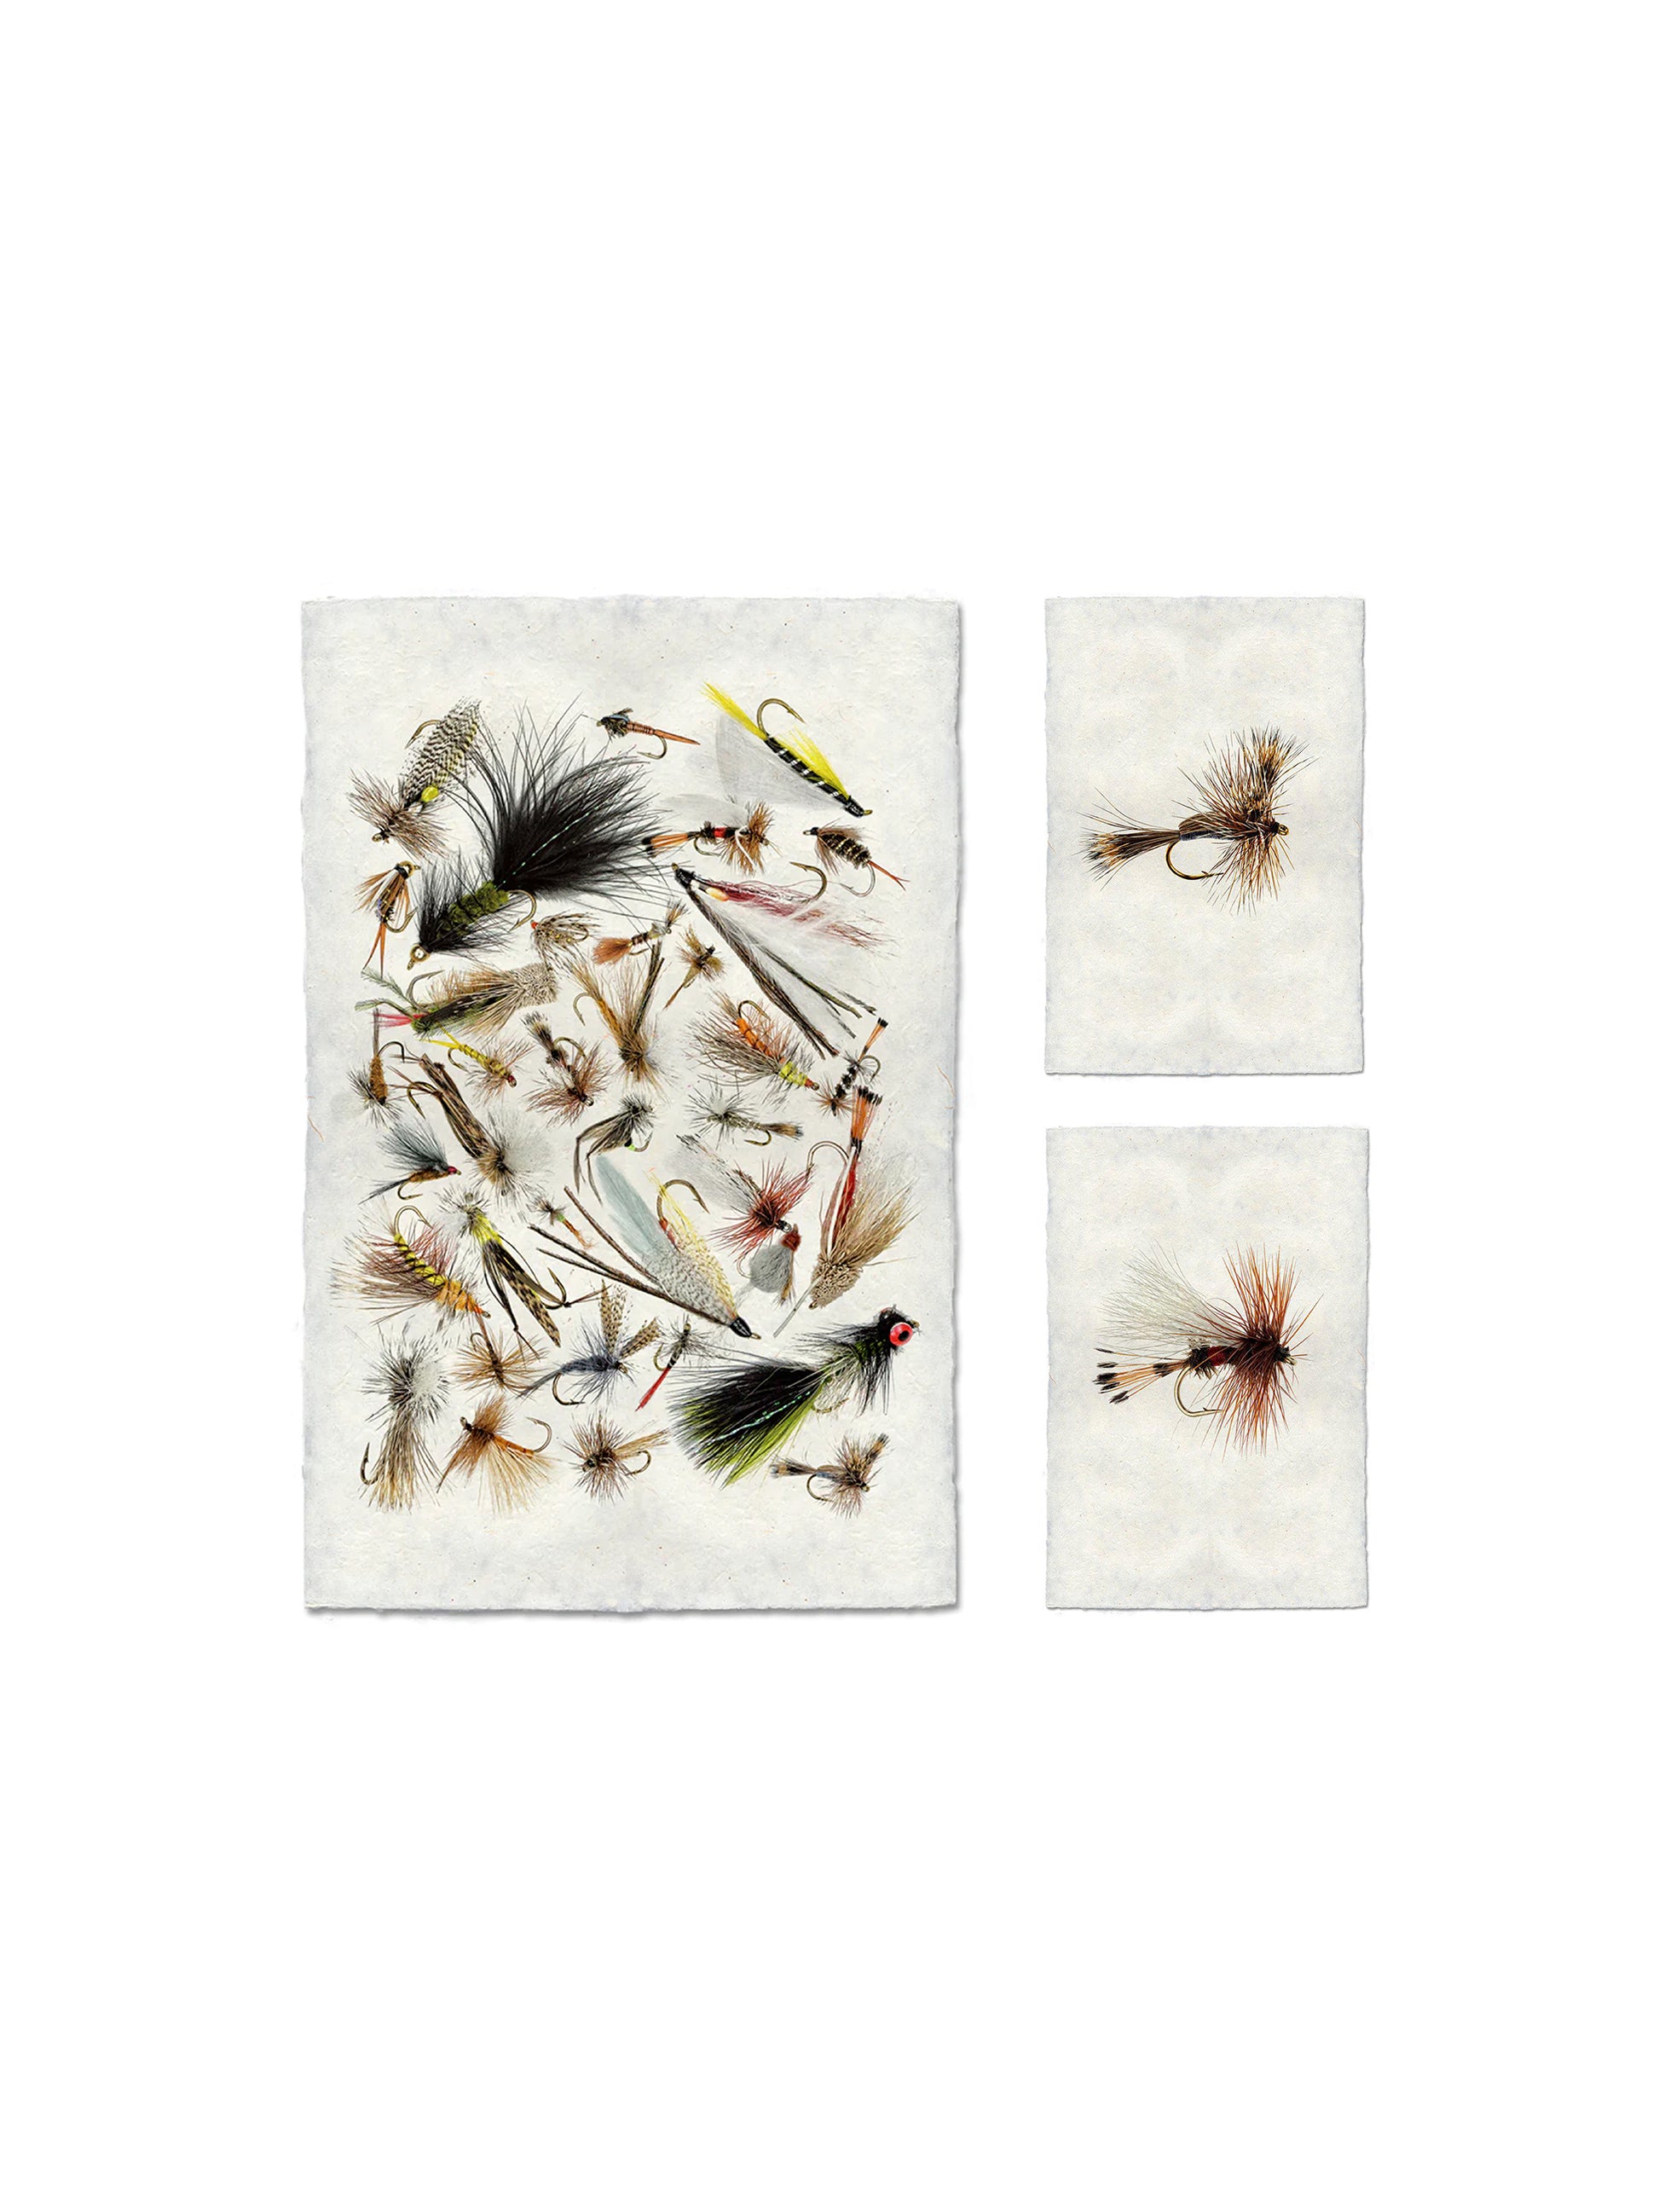 Trout Flies 5 - Vintage Fishing Flies Illustration Jigsaw Puzzle by